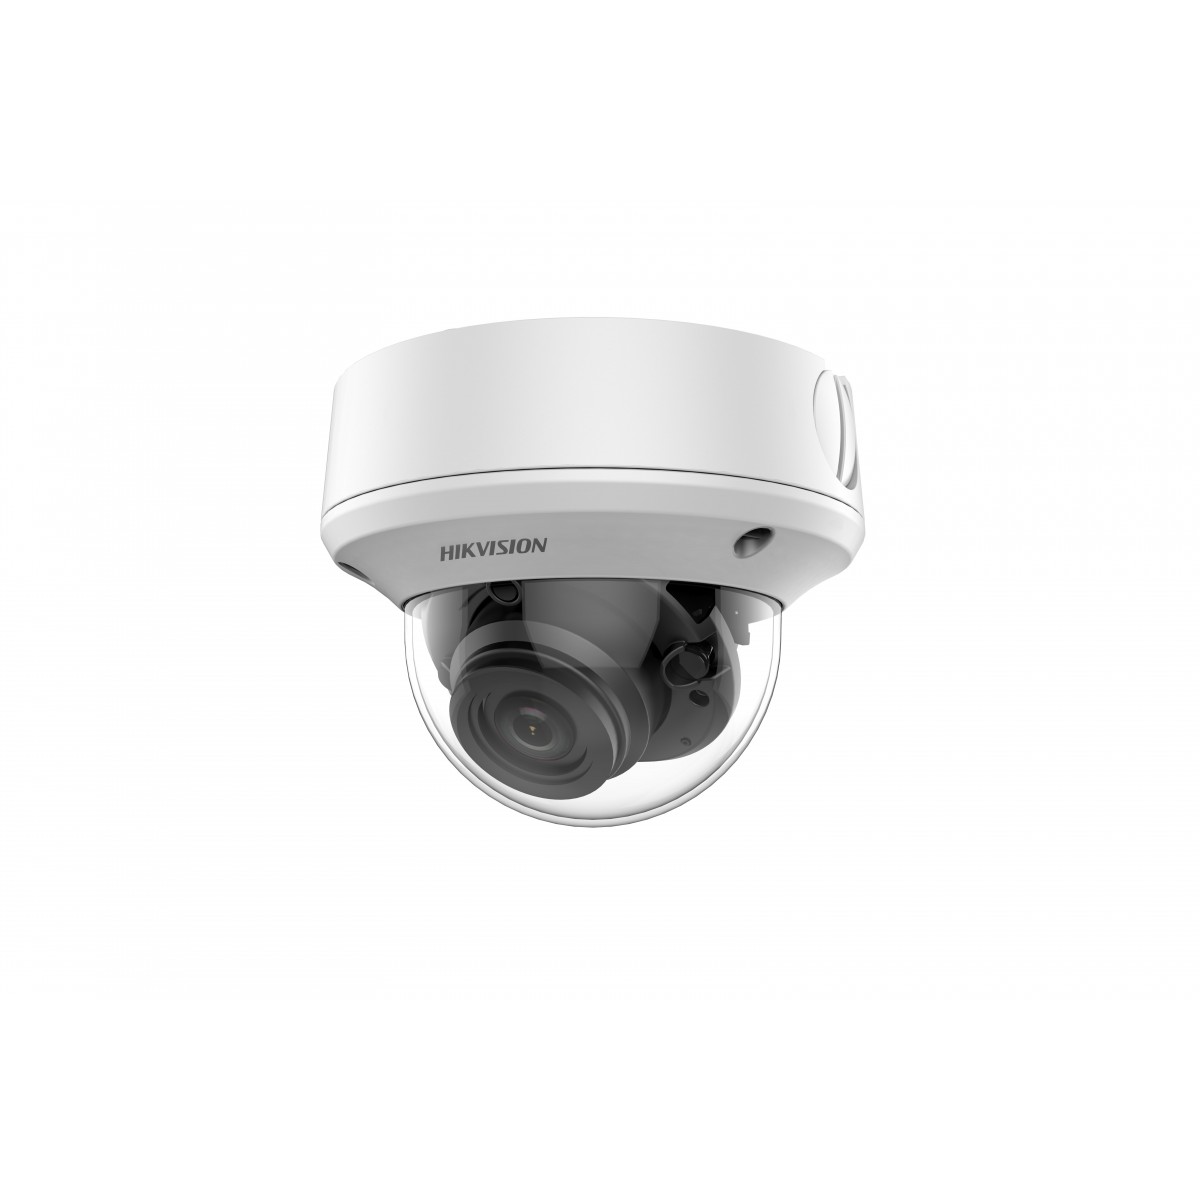 Hikvision Digital Technology DS-2CE5AD8T-VPIT3ZE - IP security camera - Indoor & Outdoor - Wired - Dome - Ceiling - White